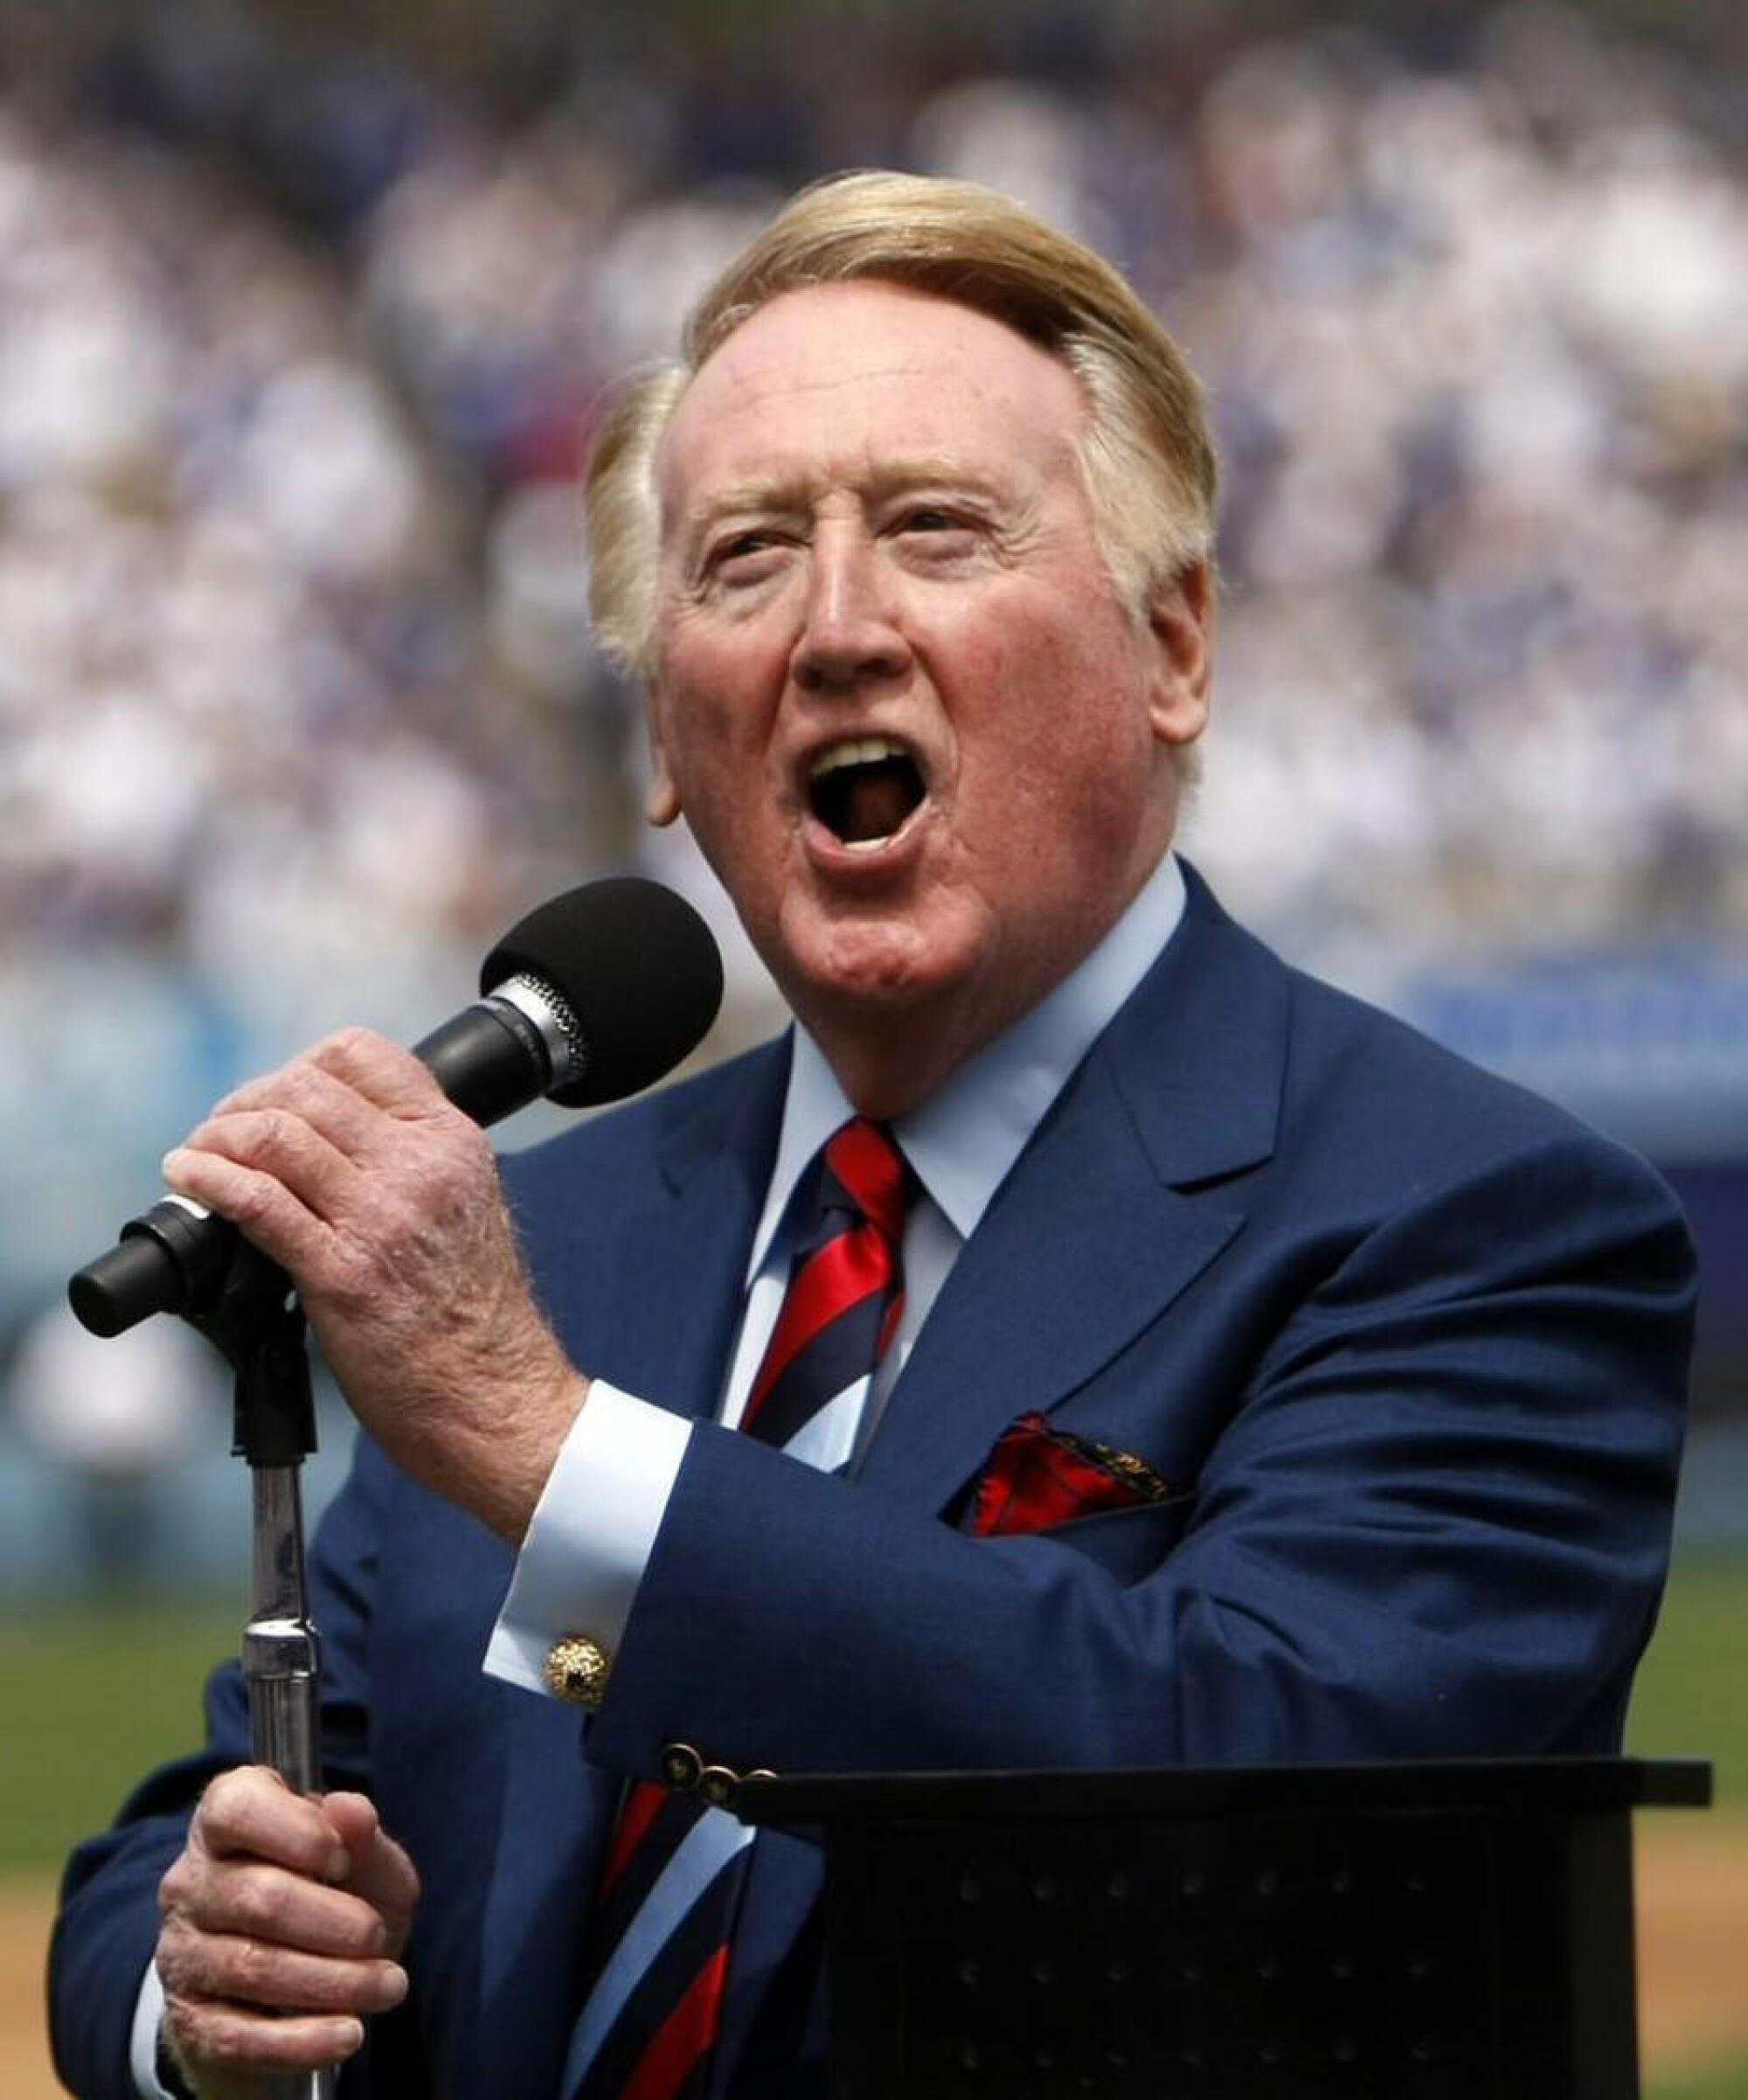 Hall of Fame broadcaster Vin Scully, the voice of the Dodgers.